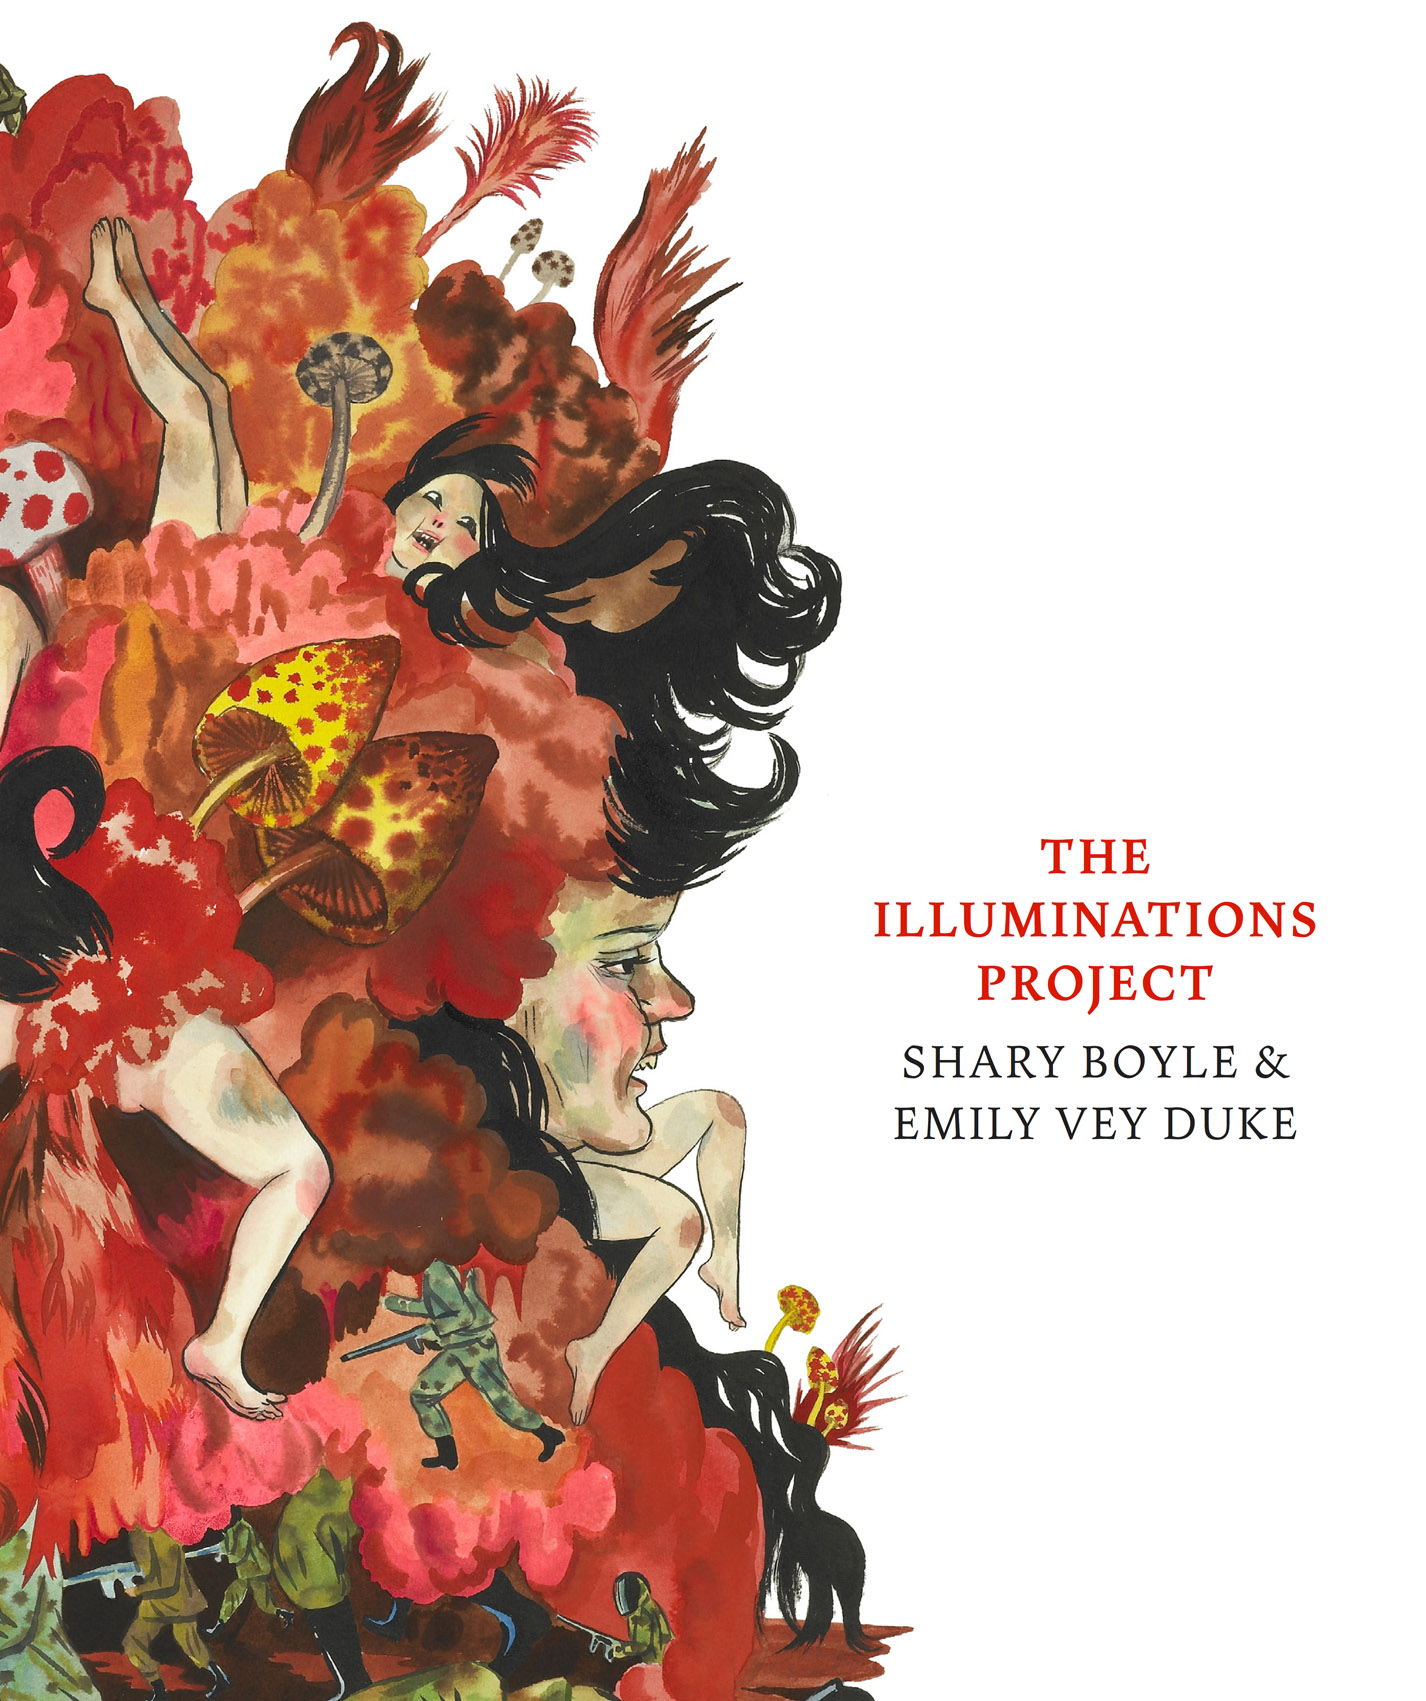 The Illuminations Edition is published by Oakville Galleries, September 2015. 10-year collaboration of 31 drawings by Shary Boyle, 31 texts by Emily Vey Duke. 